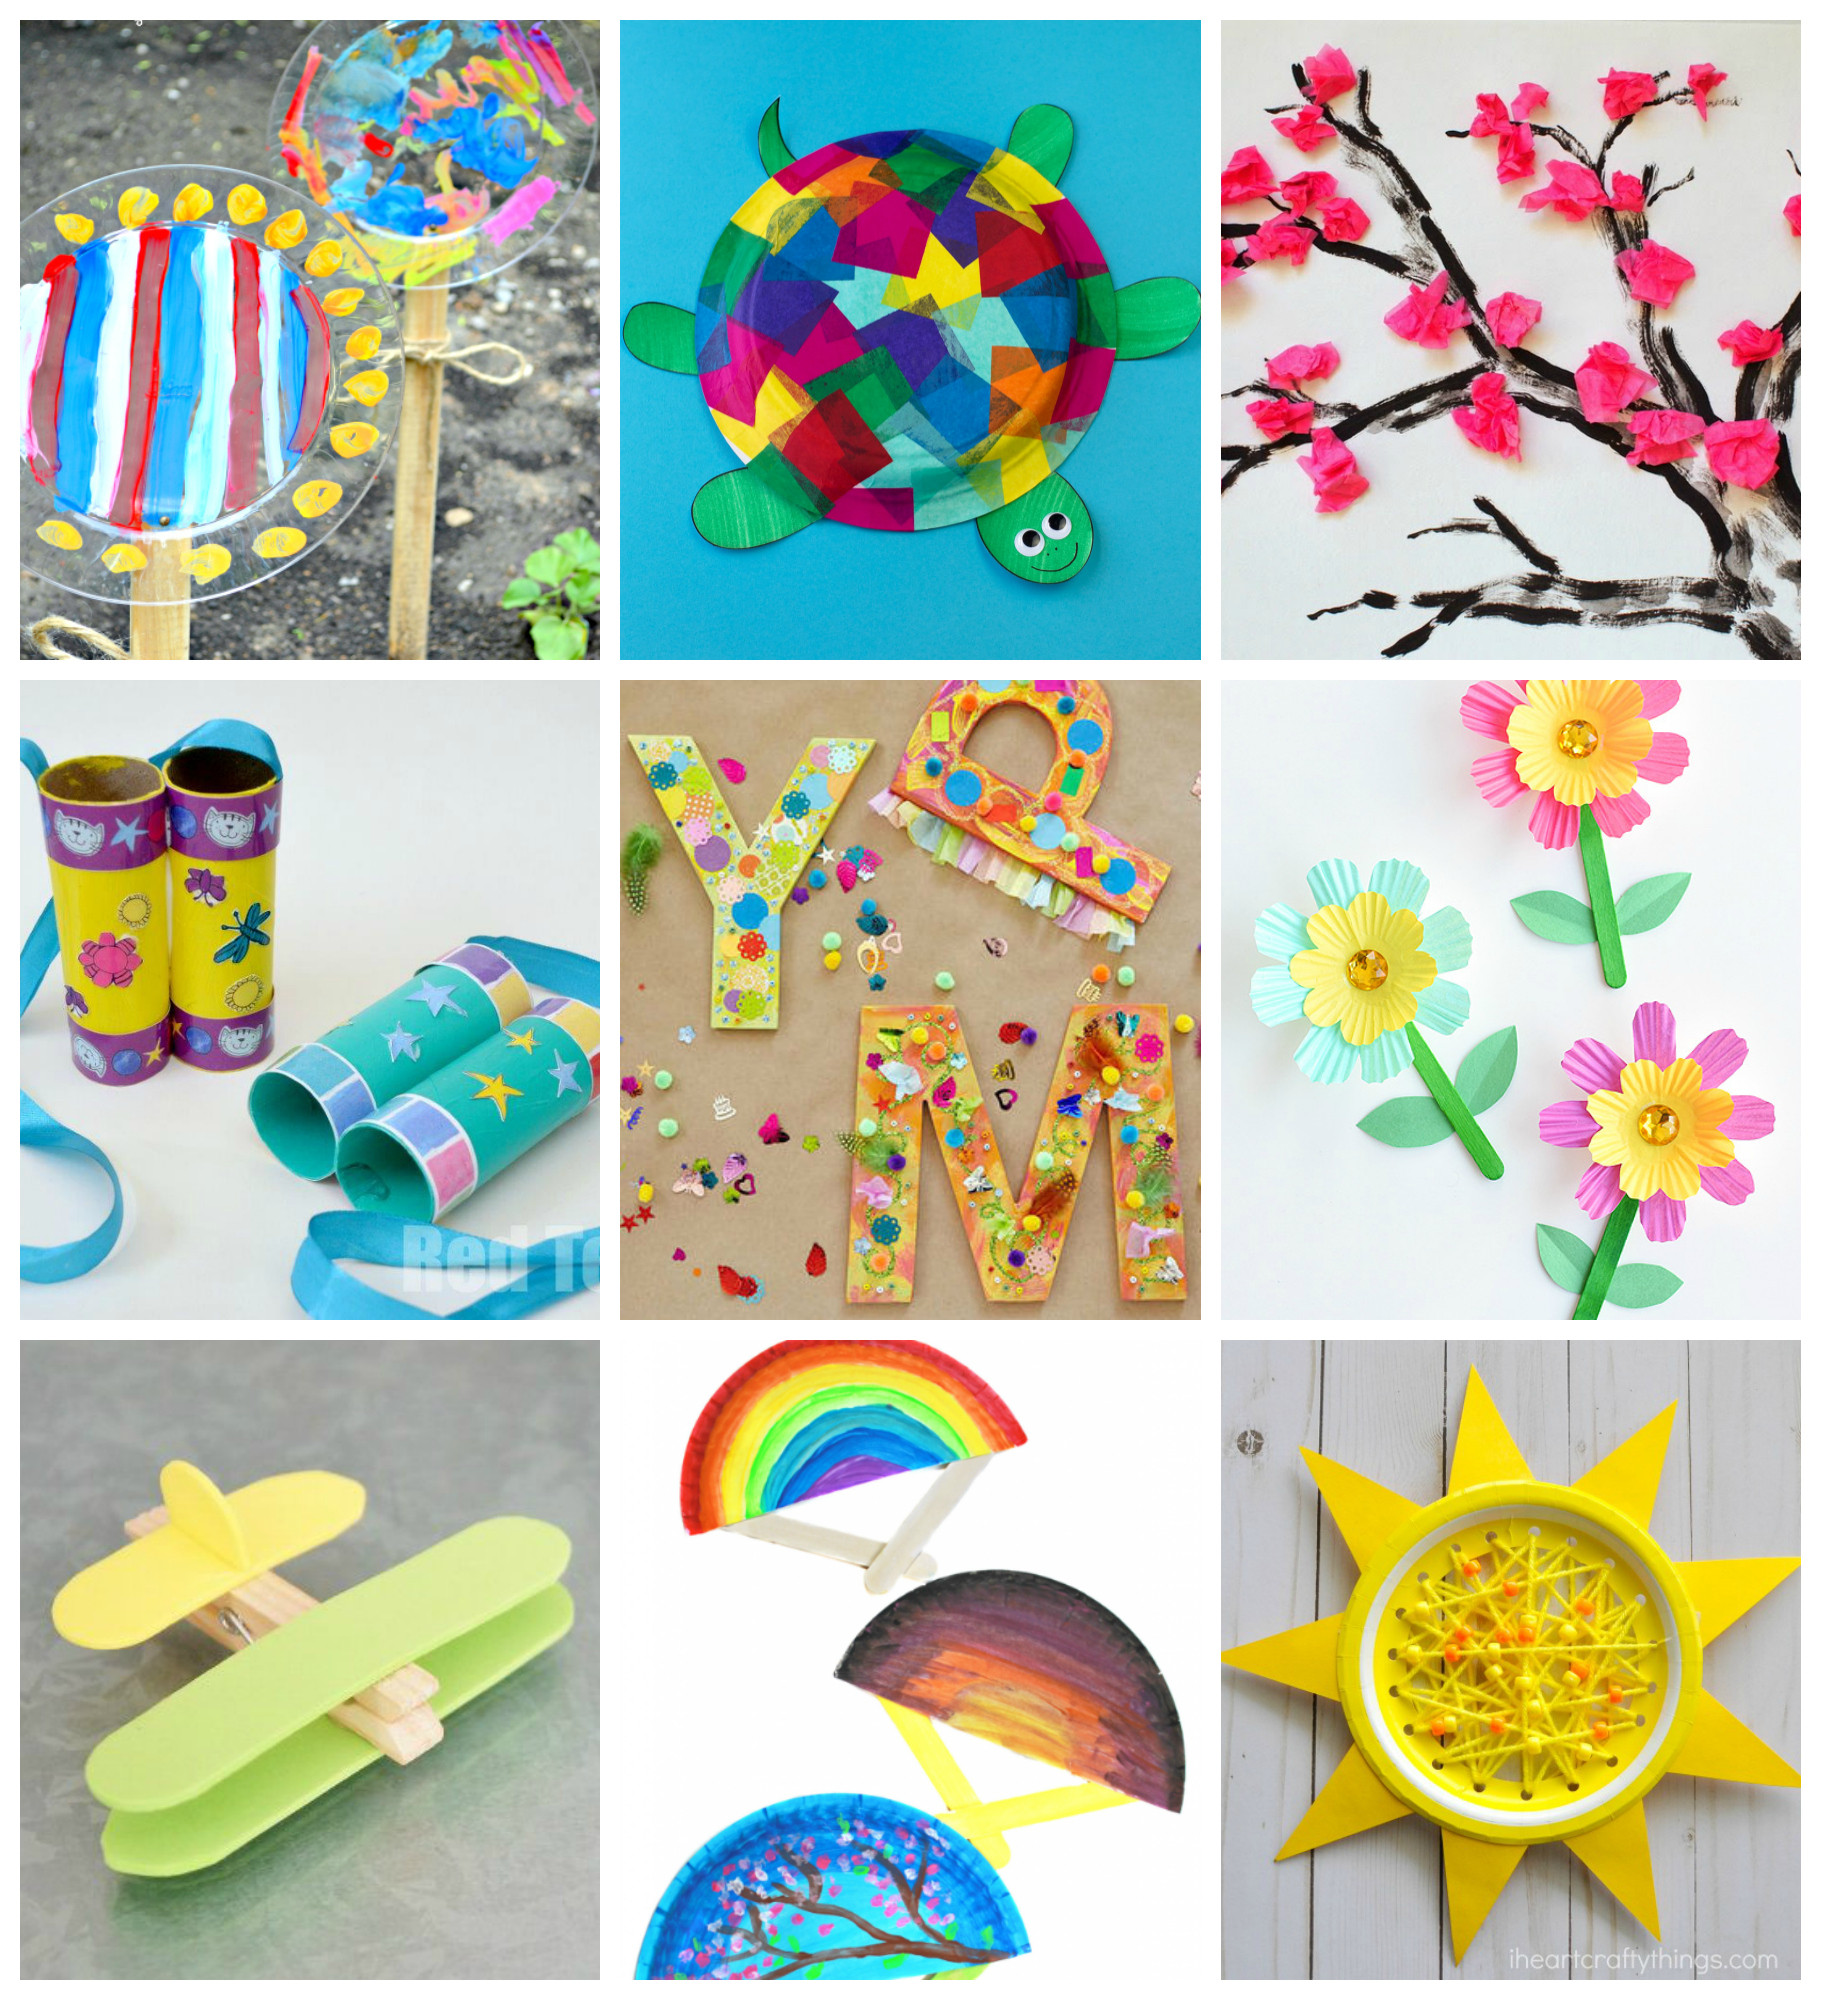 Simple Crafts For Preschoolers
 50 Quick & Easy Kids Crafts that ANYONE Can Make